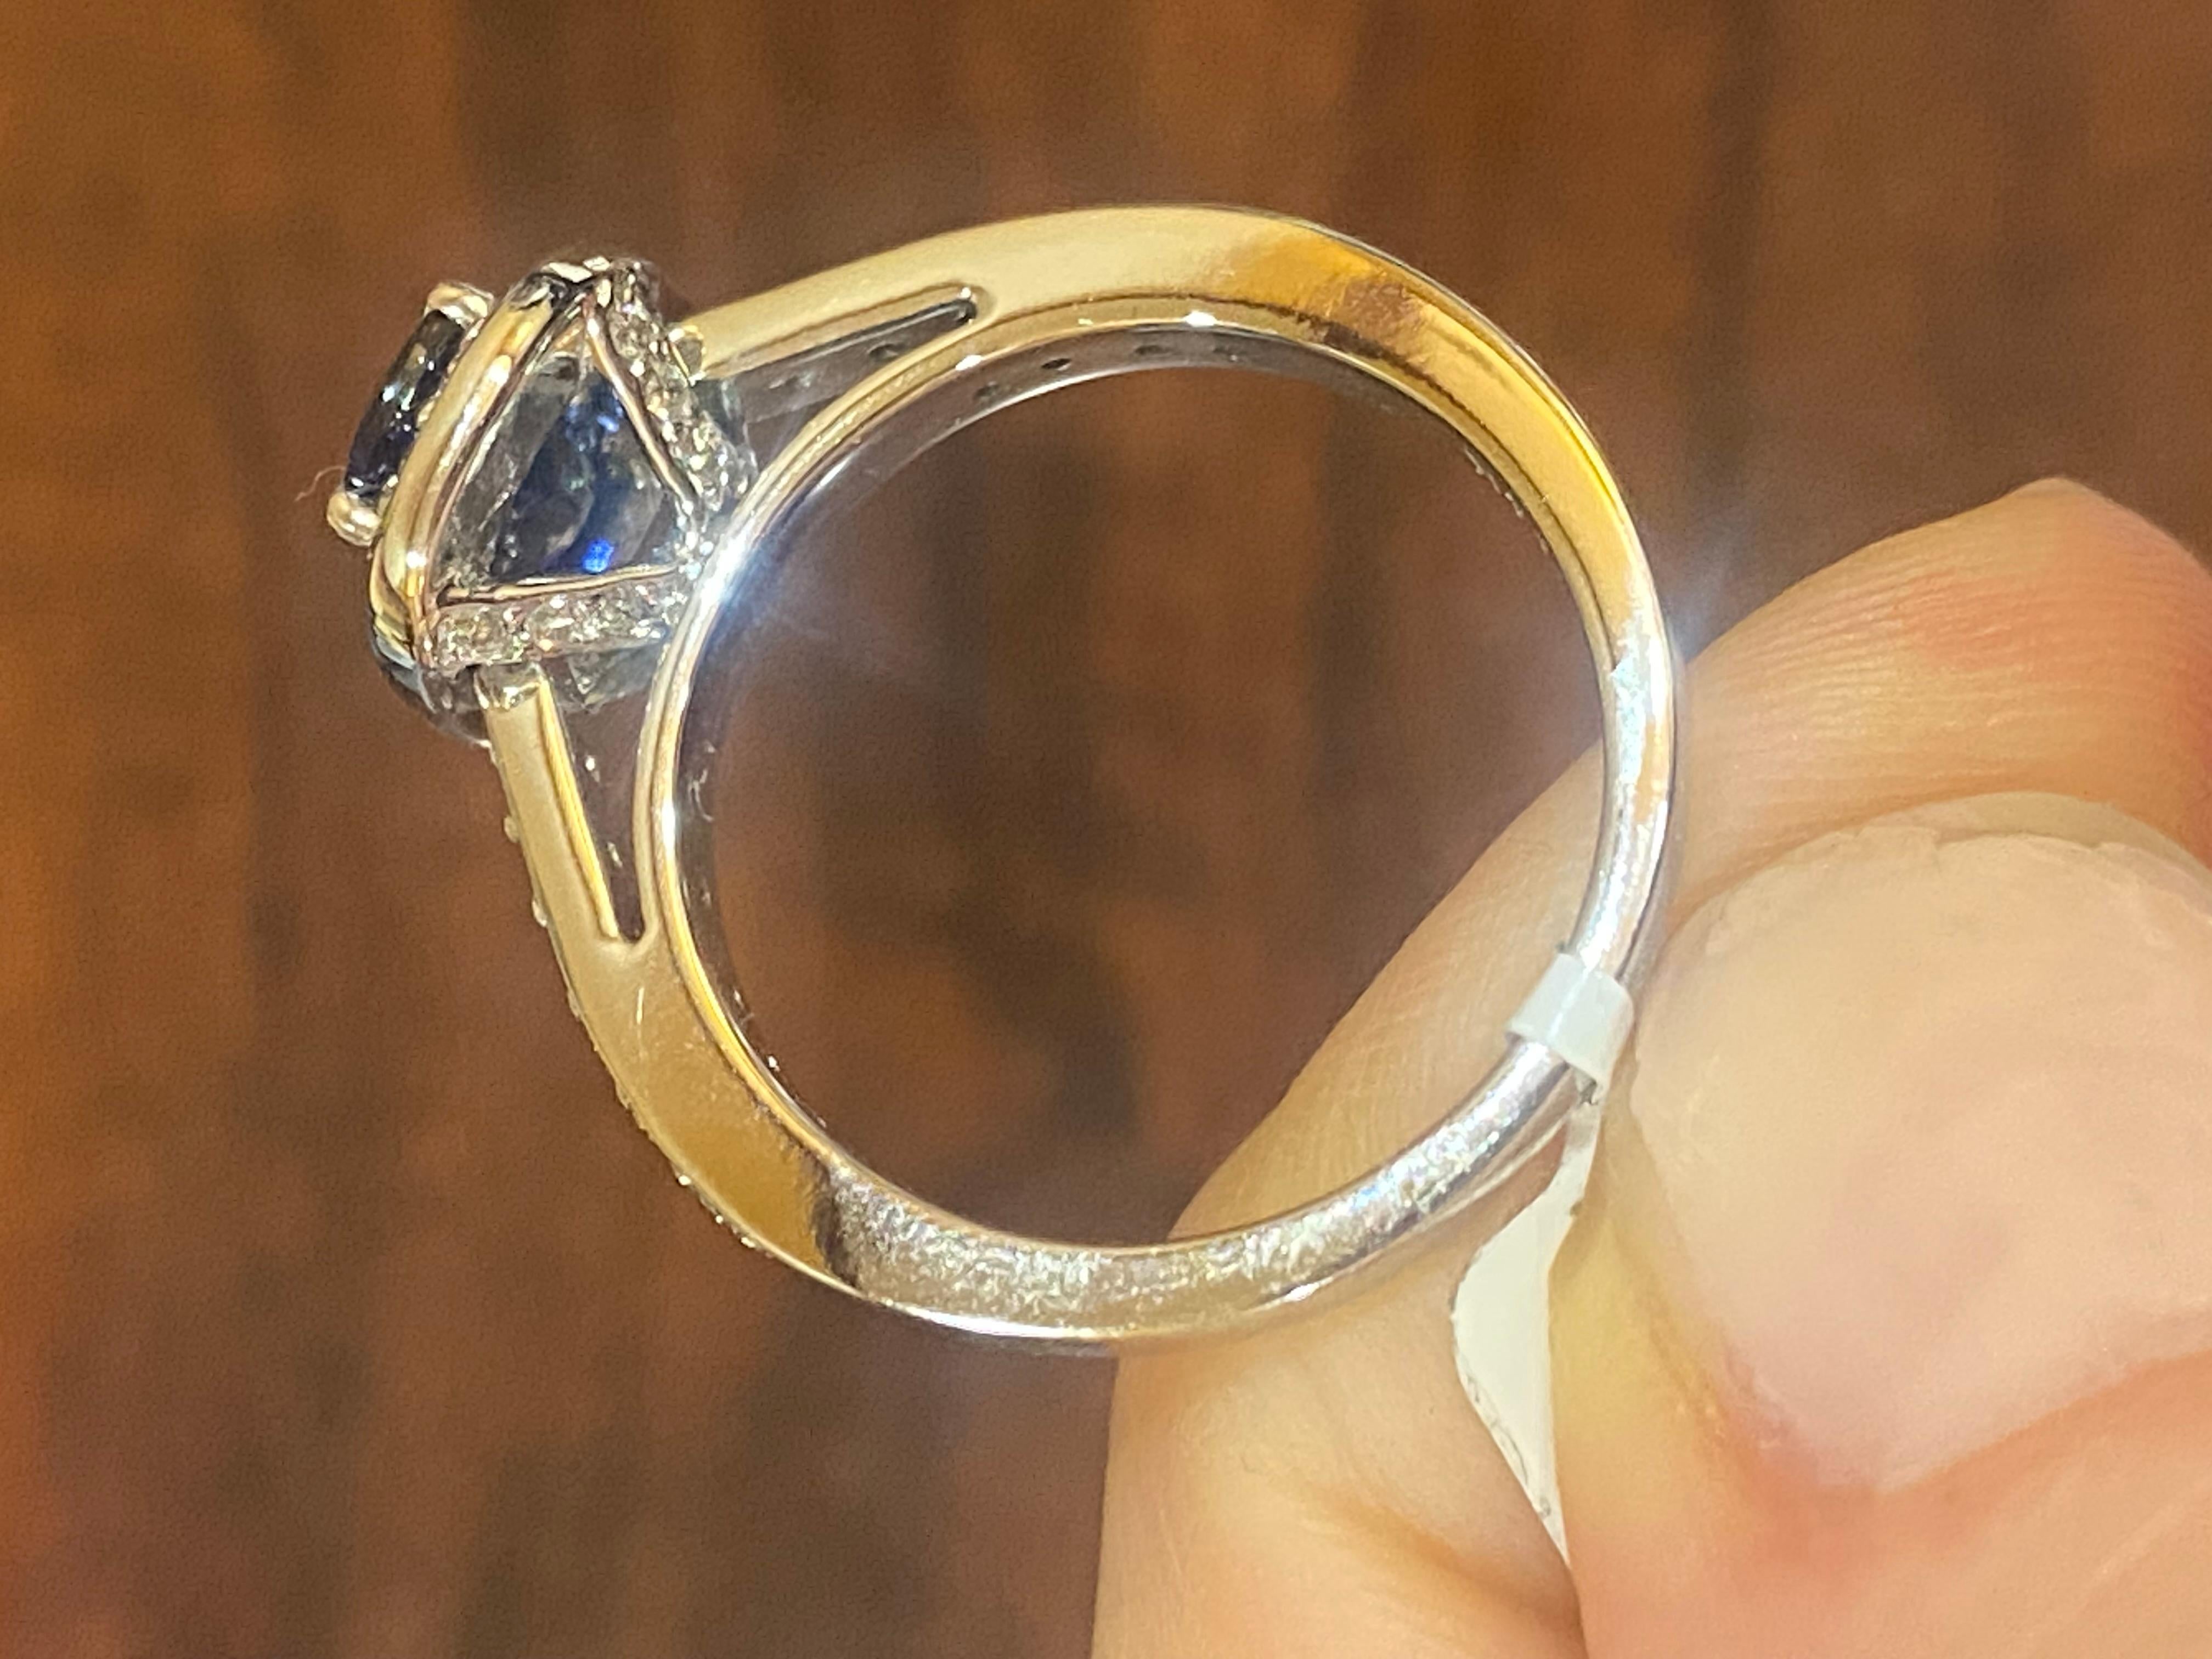 14KT White Gold
Finger Size: 6.5
(Ring is a size 6.5 but can be re-sized upon request)

Number of Emerald Cut Sapphires: 1
Carat Weight: 1.30ctw
Stone Size:  7.35 x 4.5mm

Number of Round Diamonds: 40
Carat Weight: 0.48ctw

This ring showcases a